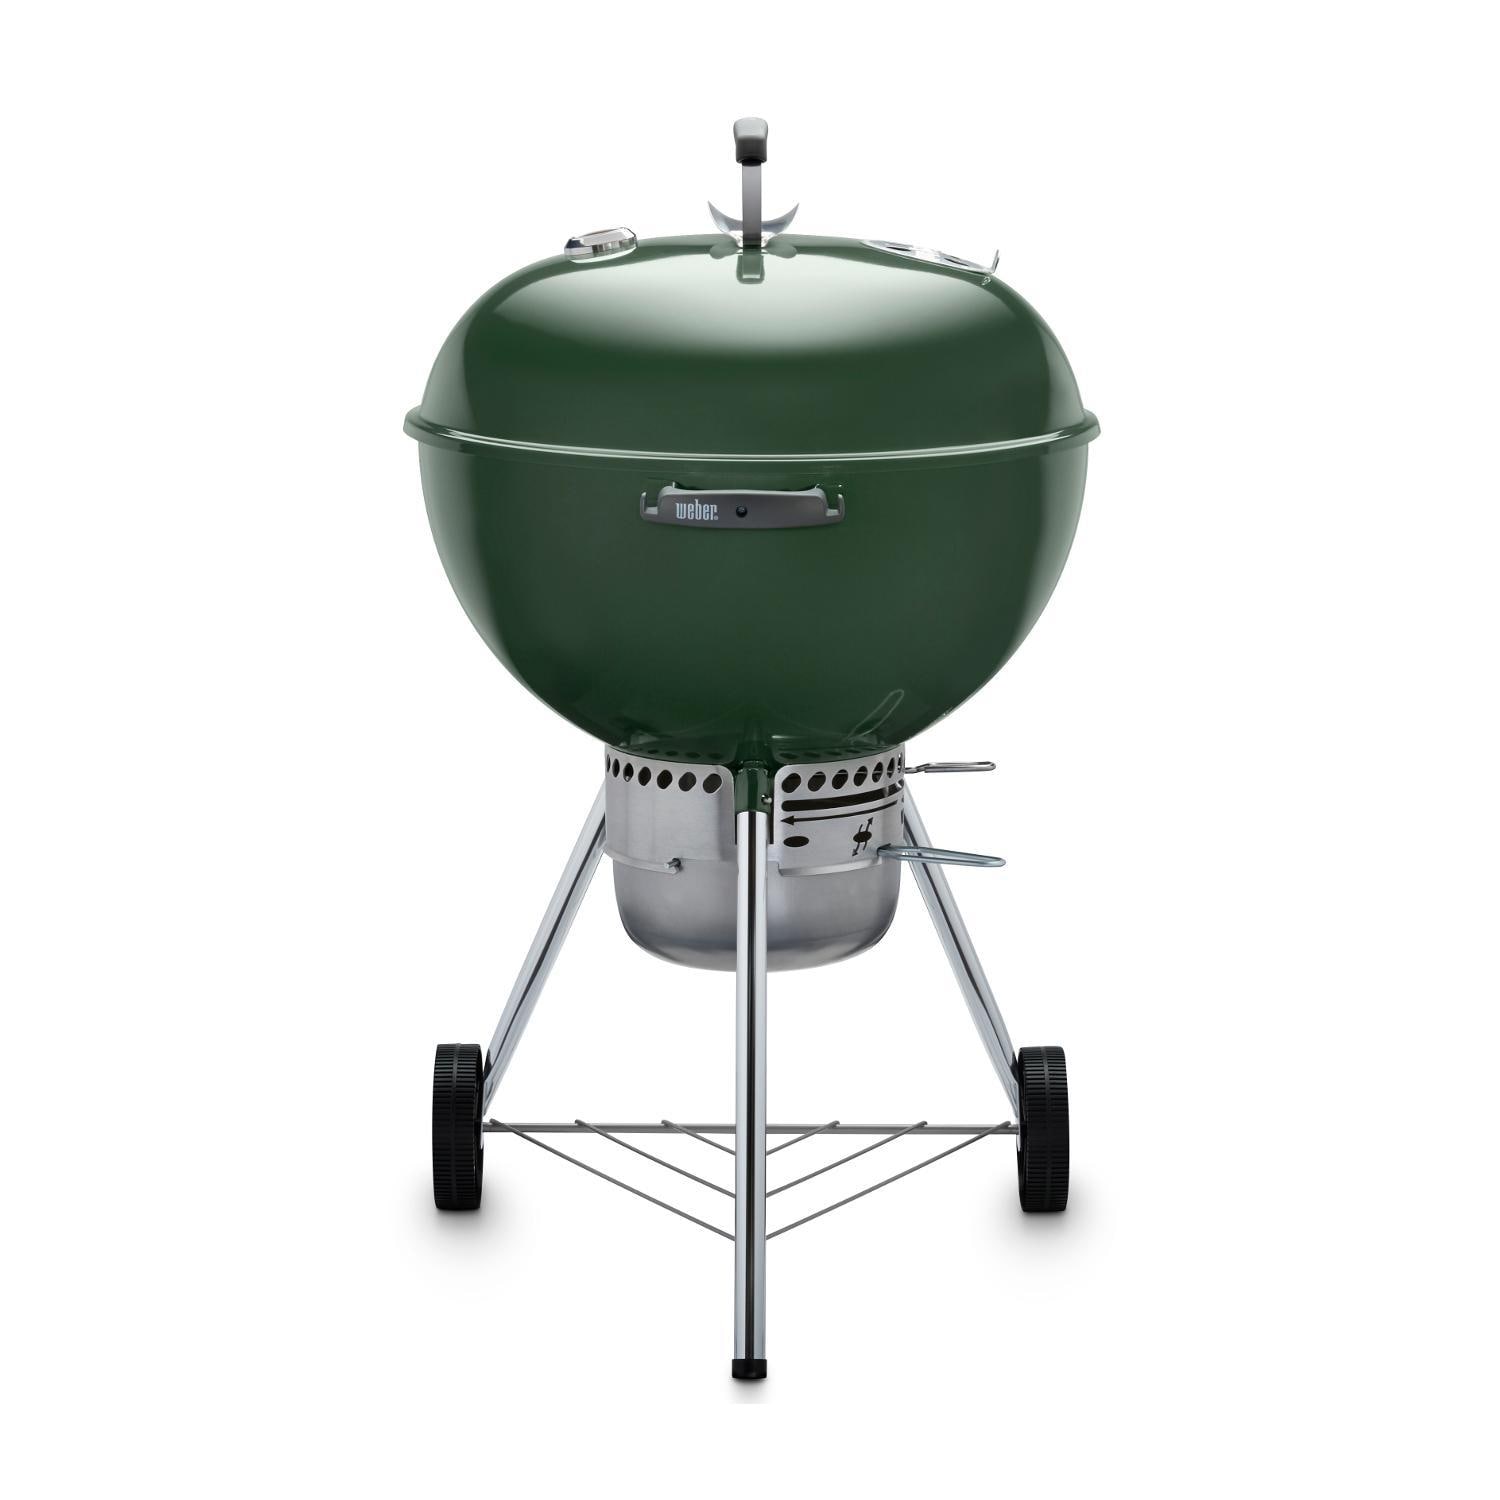 Weber Original Kettle Premium 22-Inch Charcoal Grill - Green - 14407001 - image 2 of 6